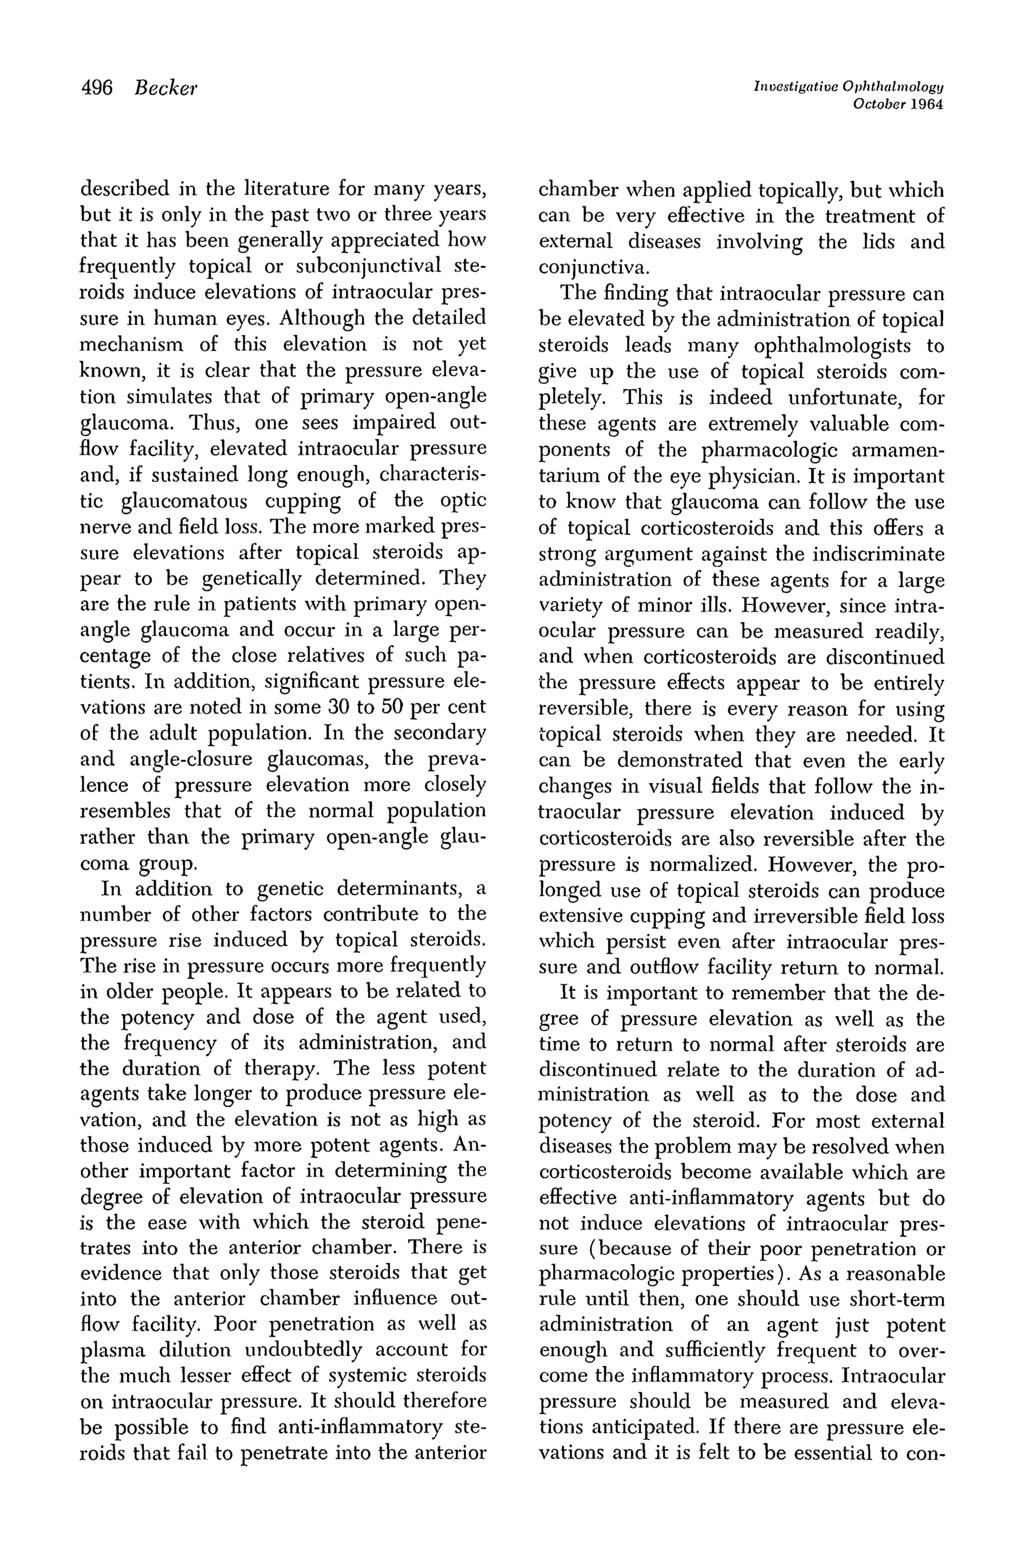 96 Becker Investigative Ophthalmology October 196 described in the literature for many years, but it is only in the past two or three years that it has been generally appreciated how frequently